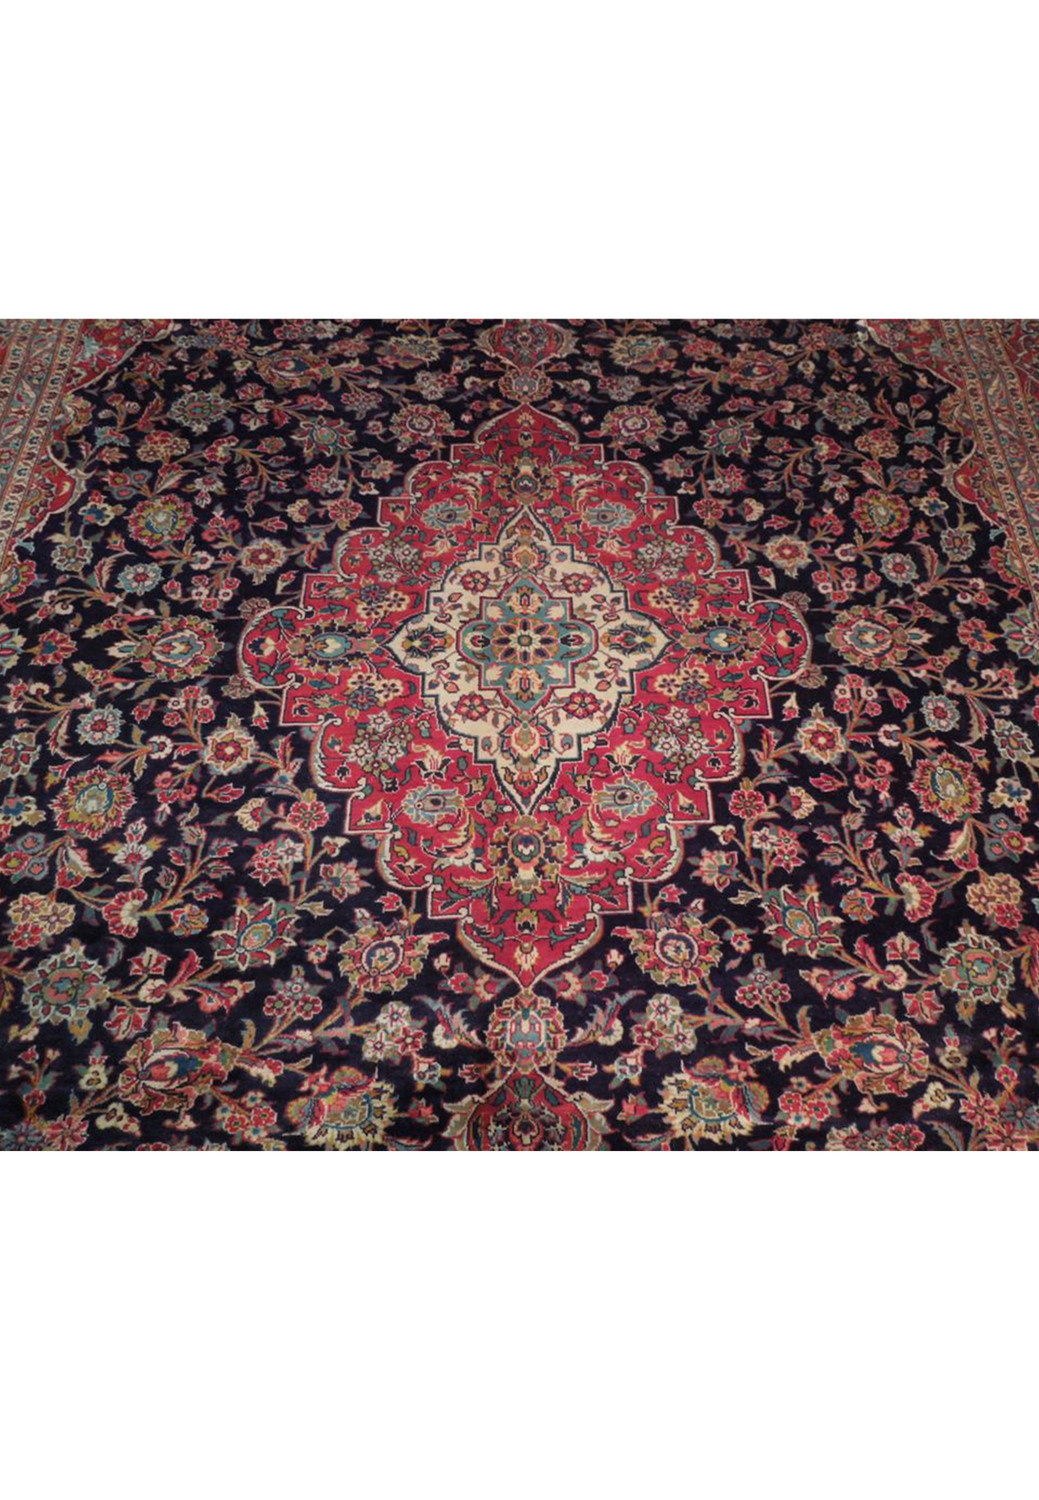 Hand-knotted Persian Kashan area rug showcasing a striking central medallion pattern with a high knot count wool construction, dimensions 10x13.5 feet